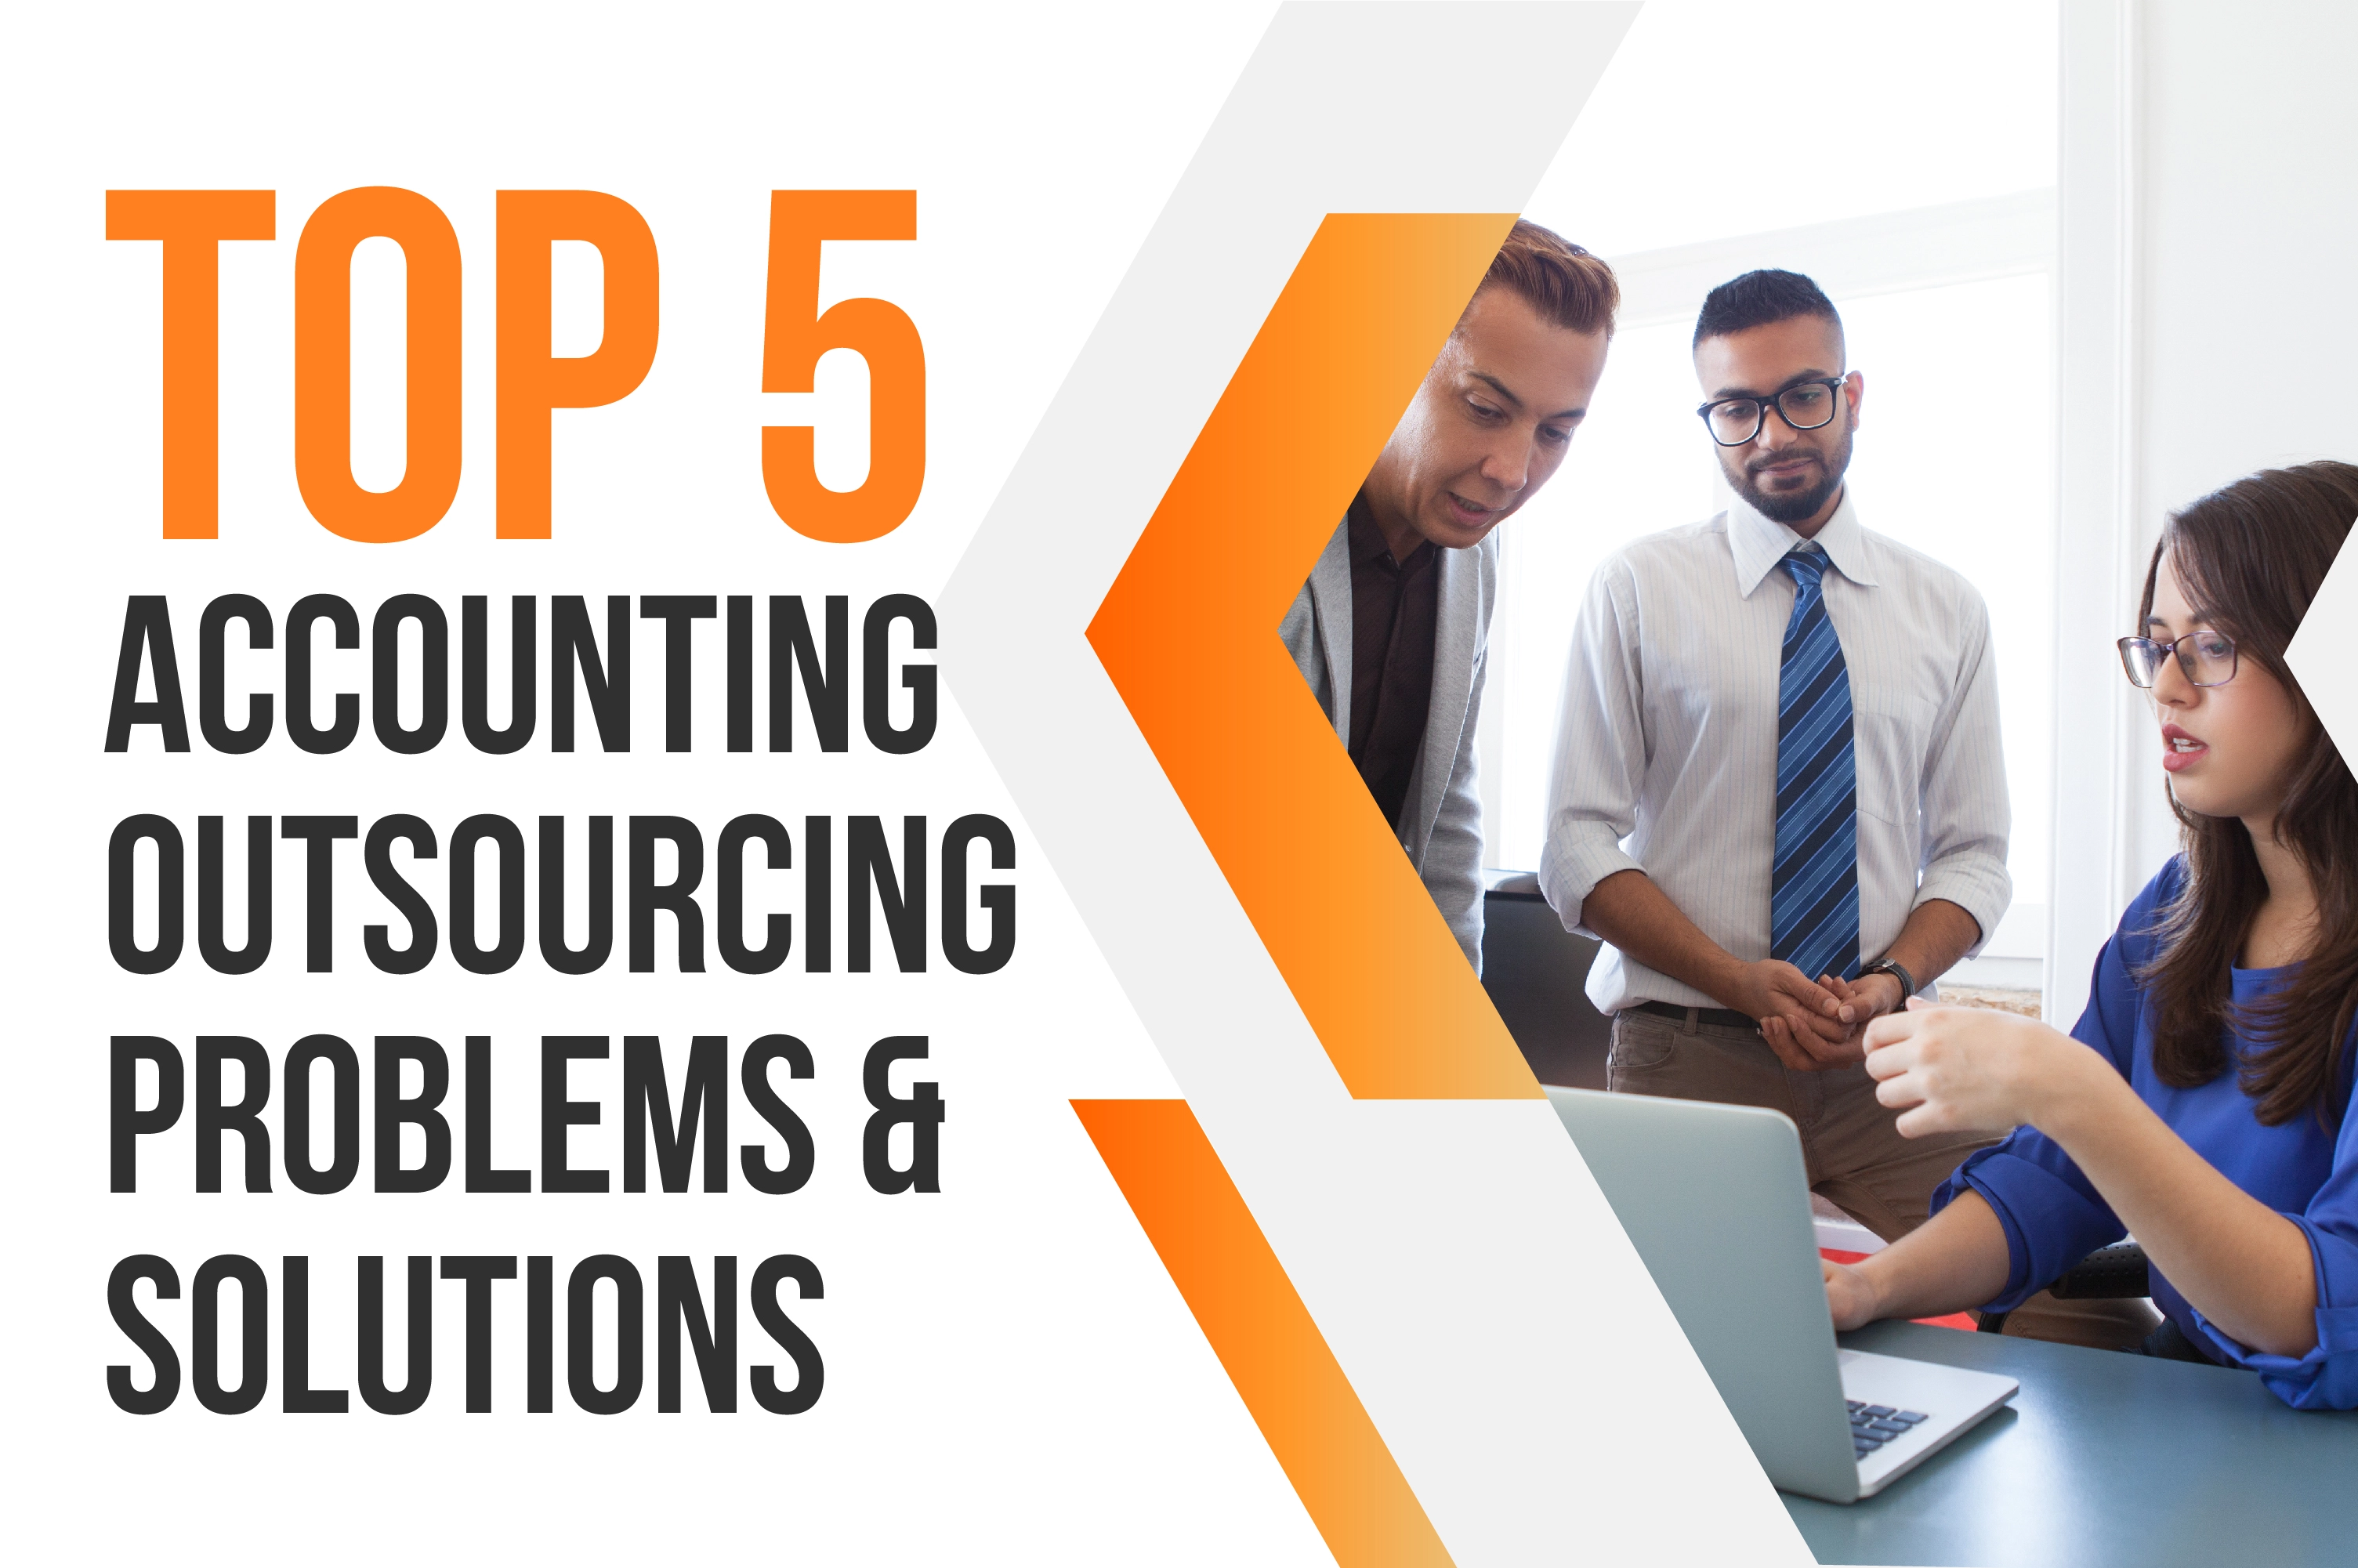 Top 5 accounting outsourcing problems and solutions